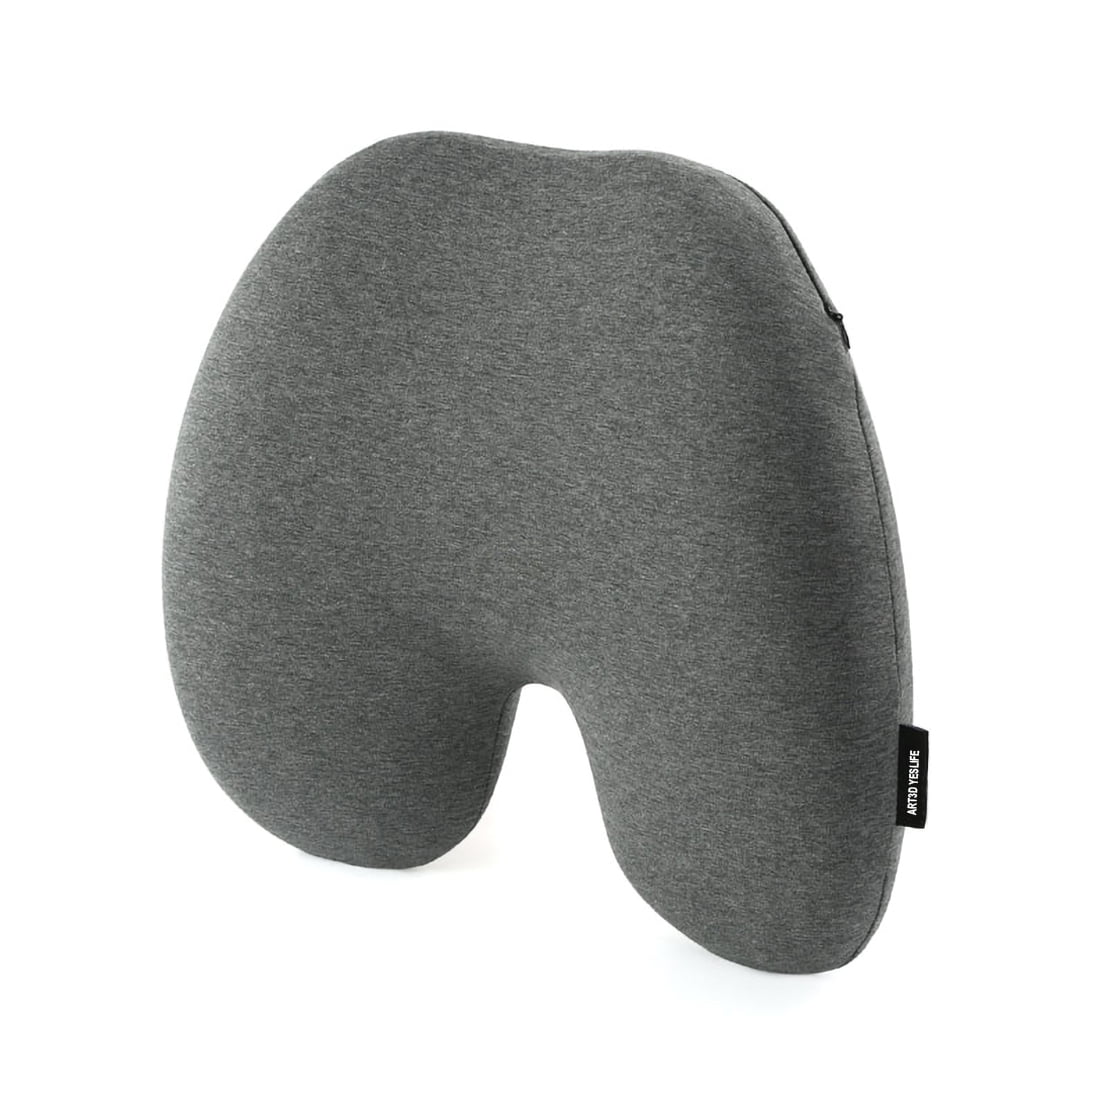 Art3d Premium Lumbar Support Pillow Designed for Lower Back Pain Relief Ideal Back Cushion for